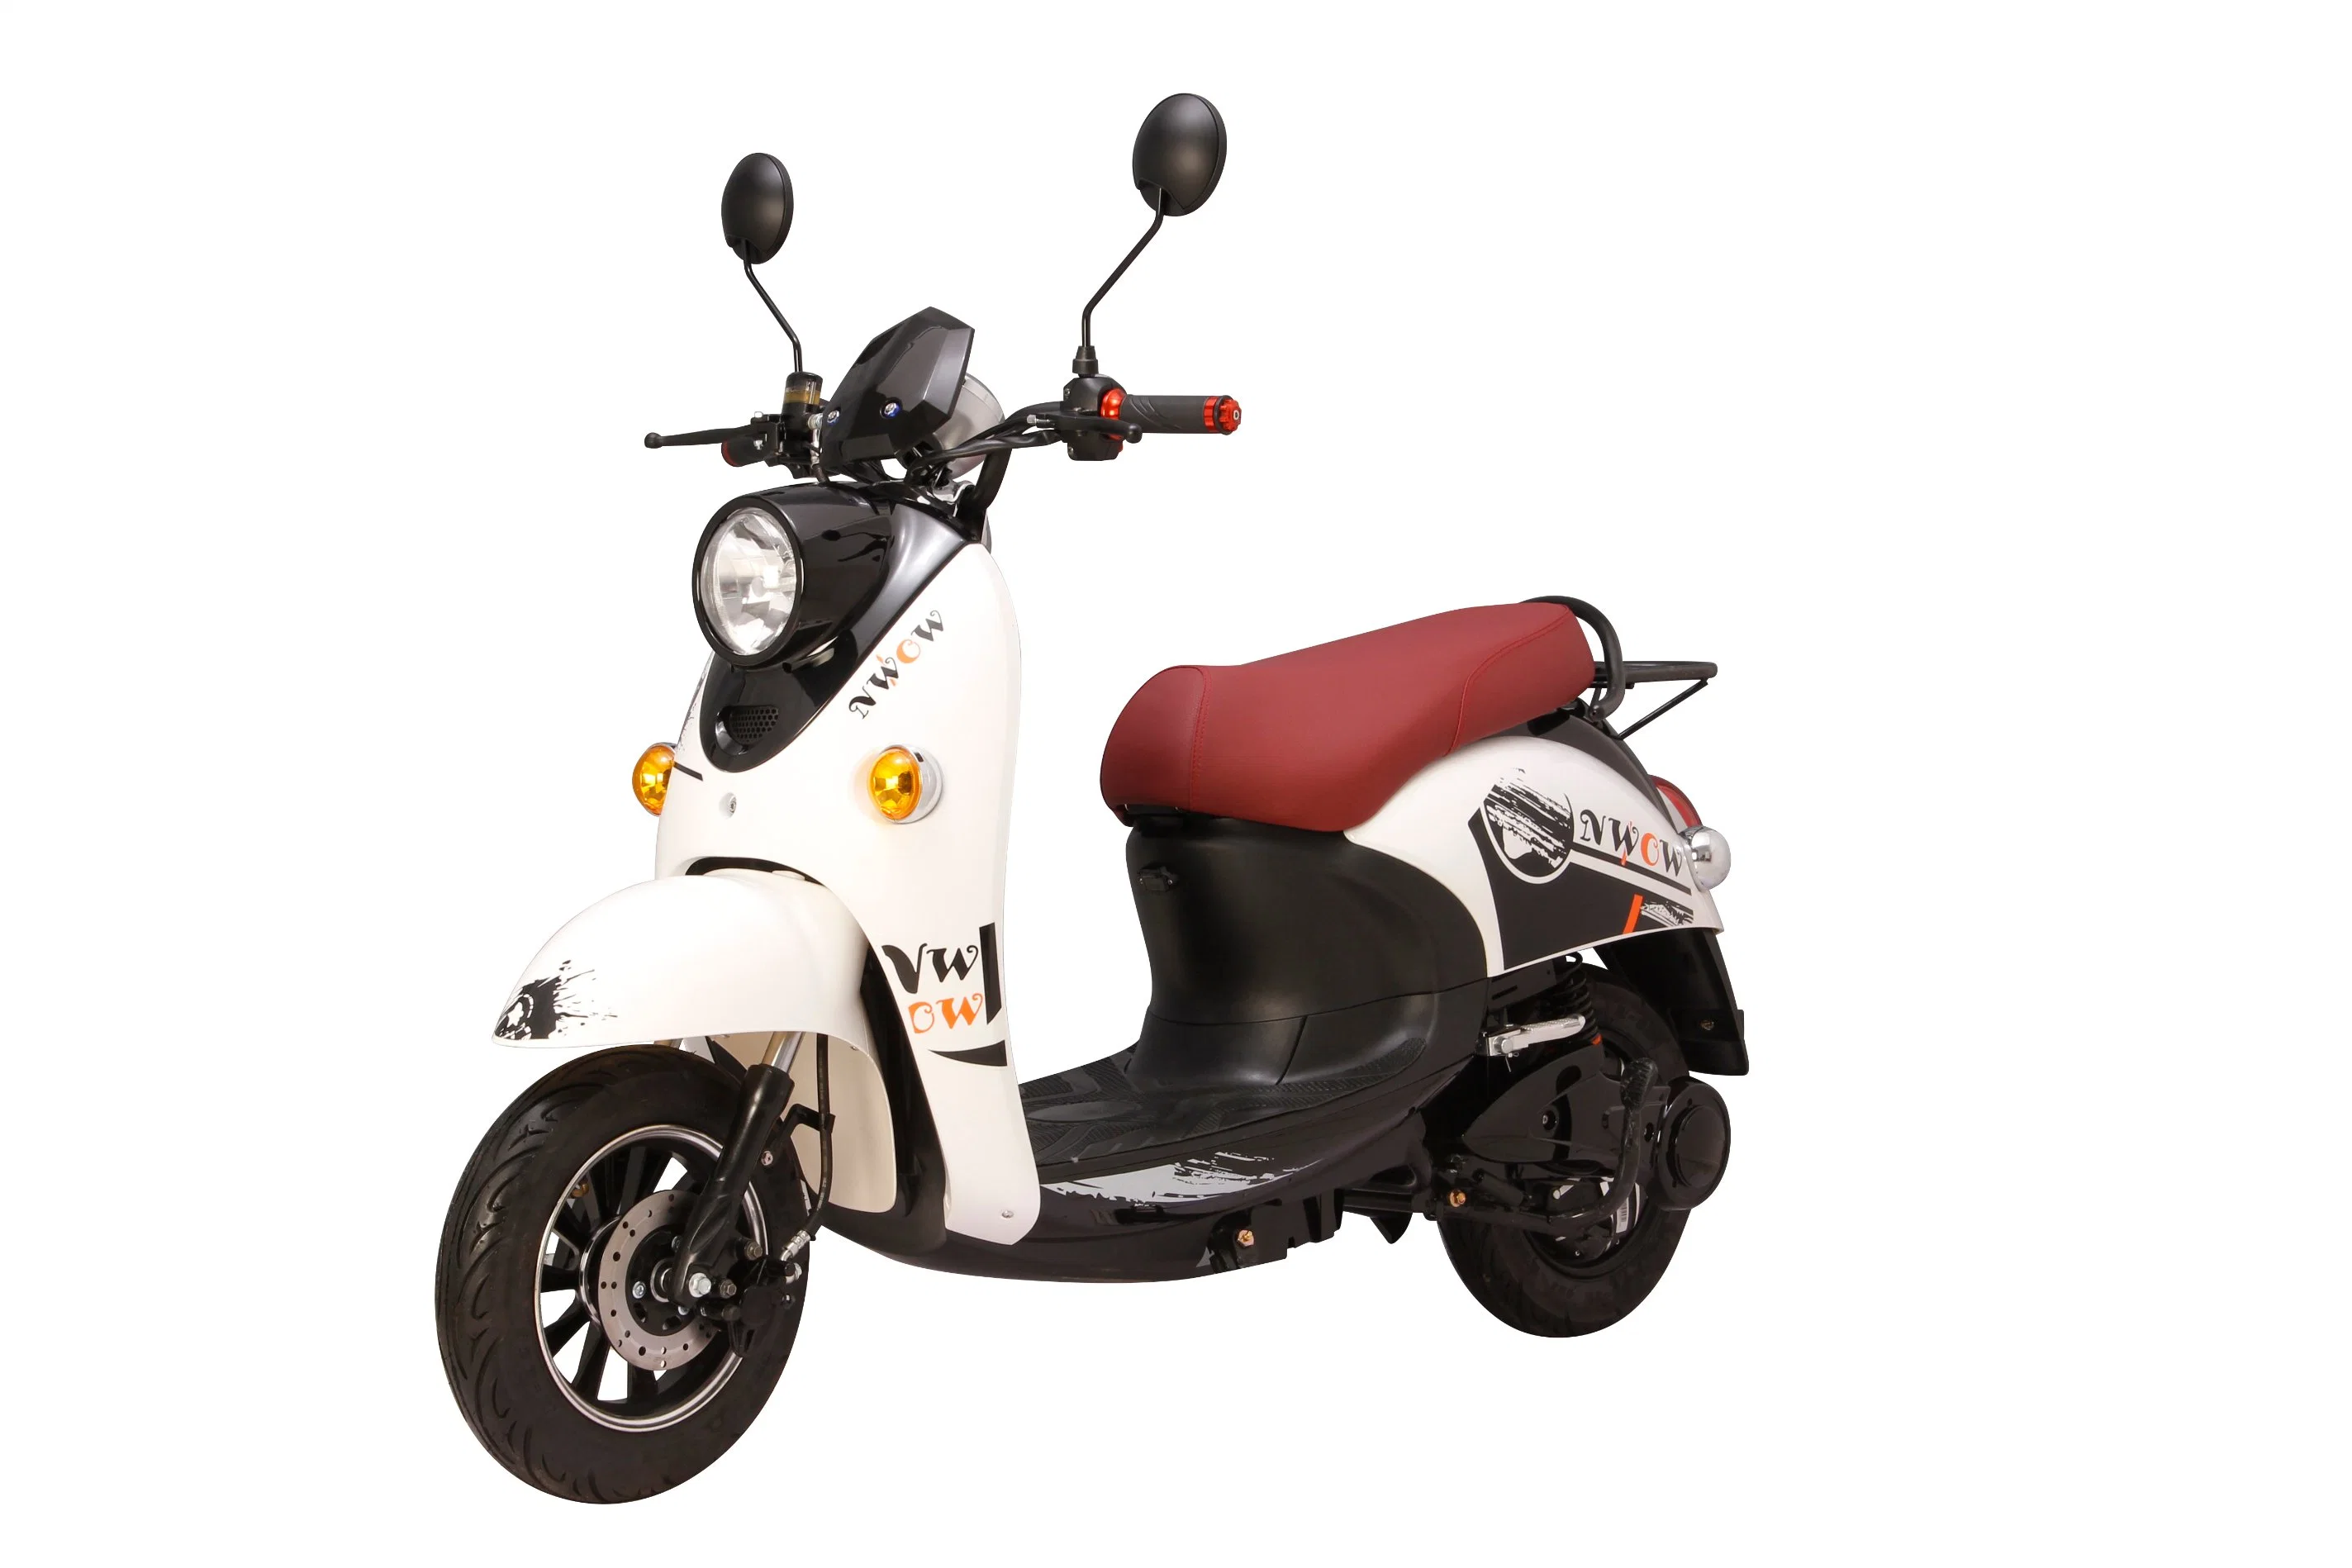 EEC Model of Electric Motorcycle 45km/H Safe Speed High Quality with Europe Quality Standard